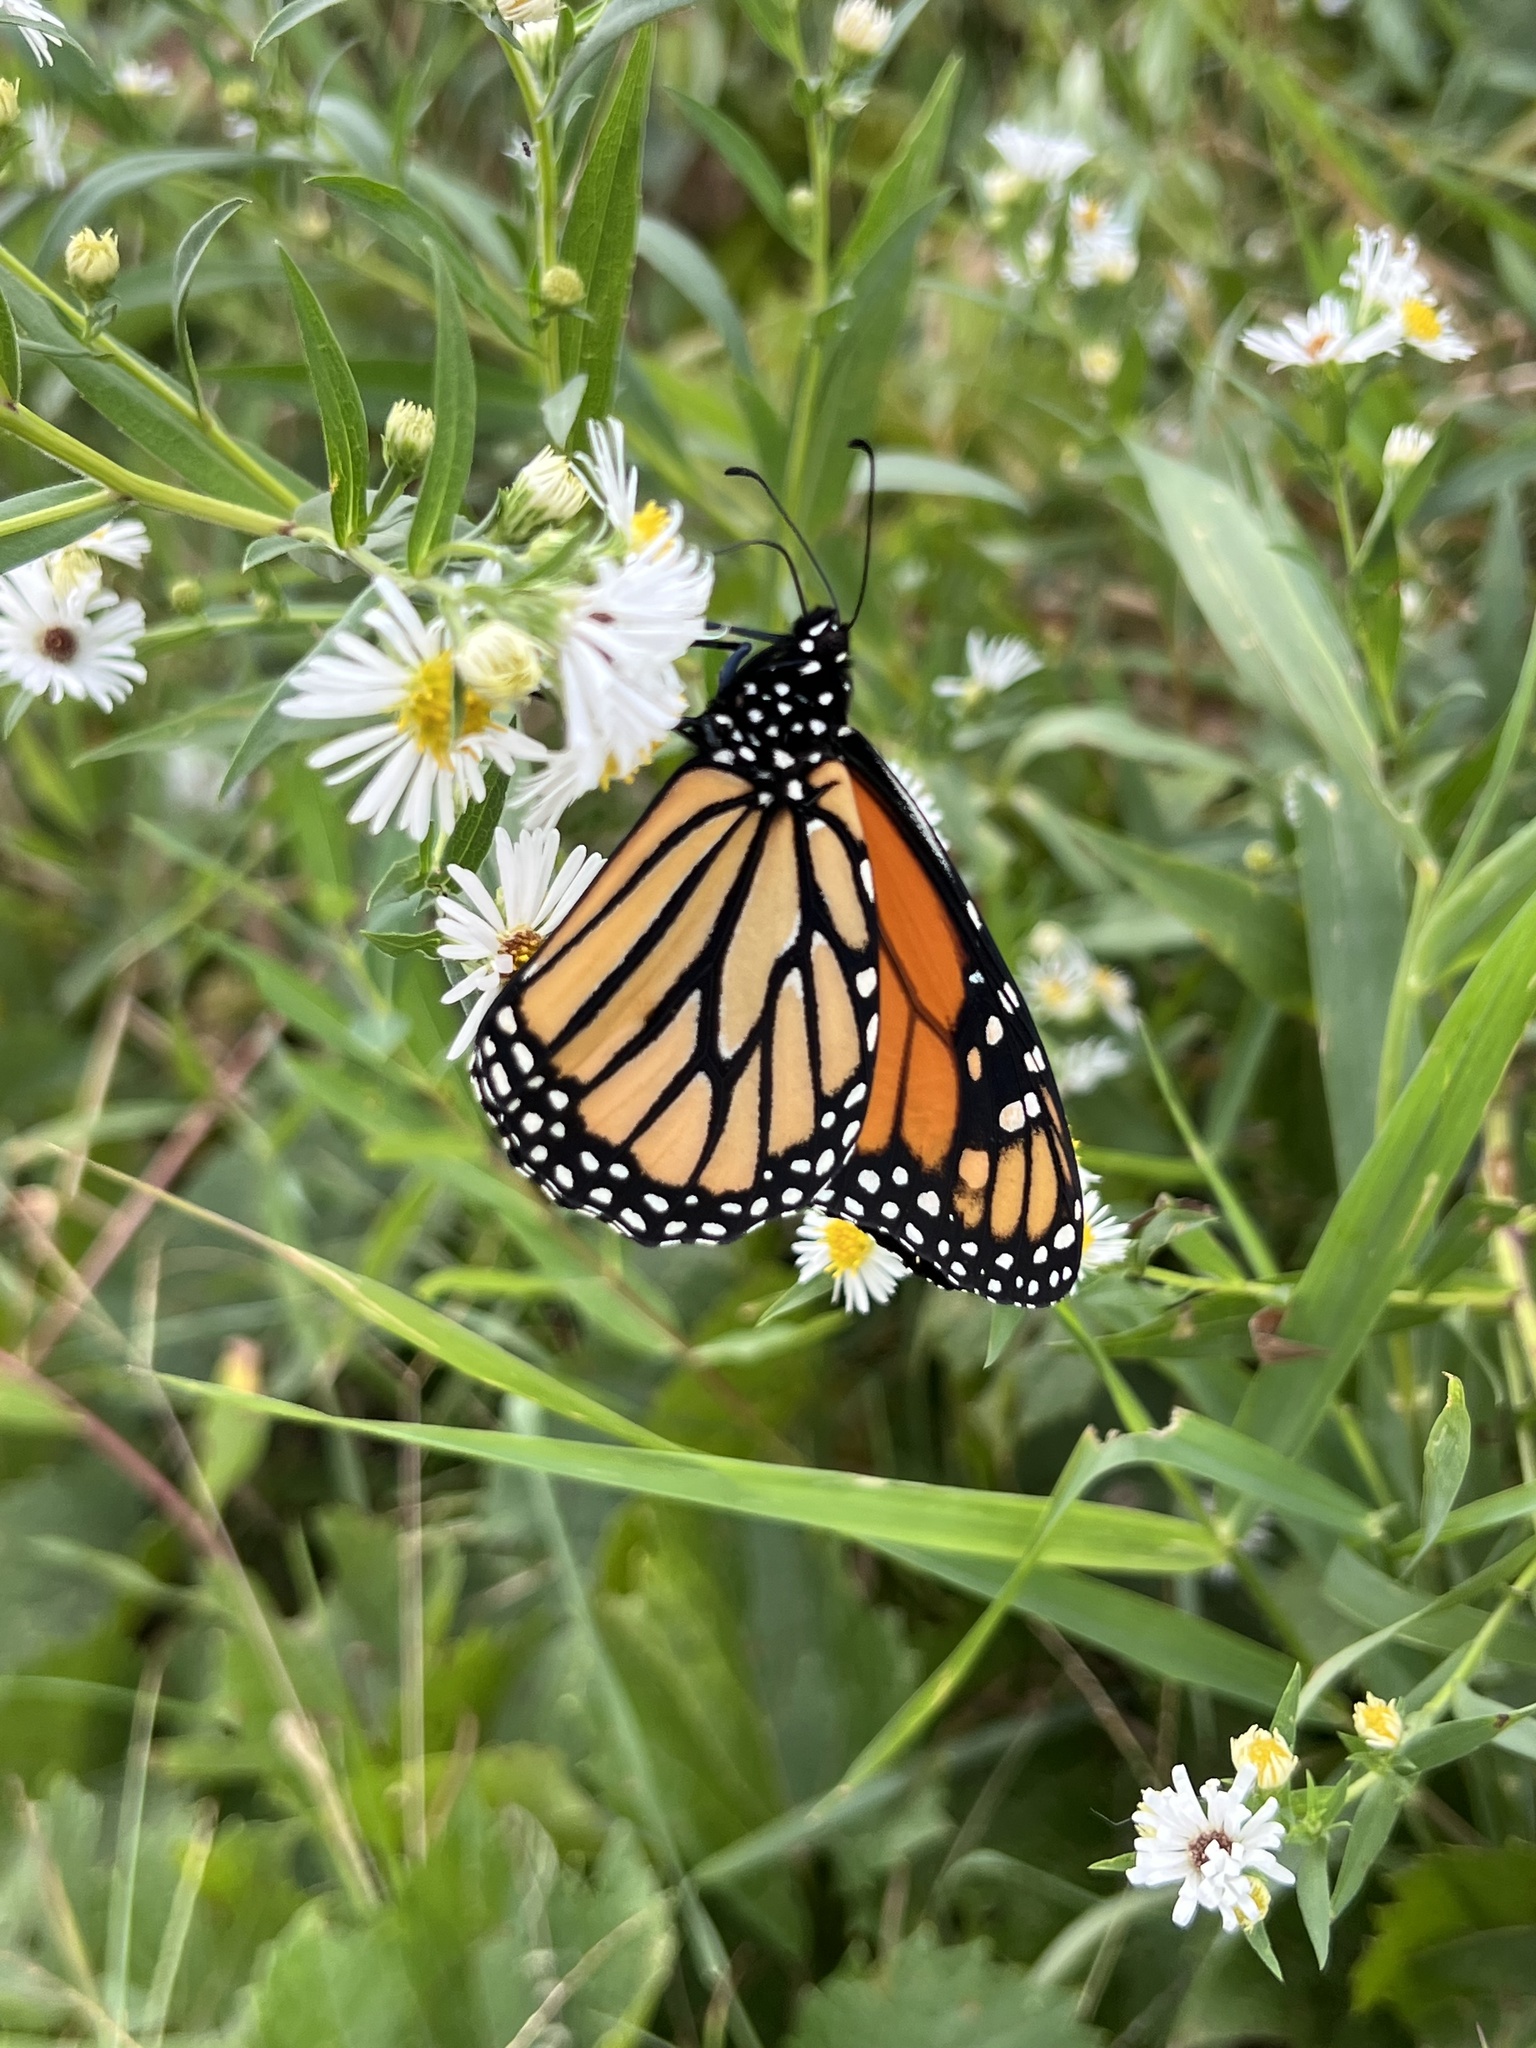 Monarch butterfly is orange, black and white. It's on an aster flower and there is lush green understory vegetation in the background.